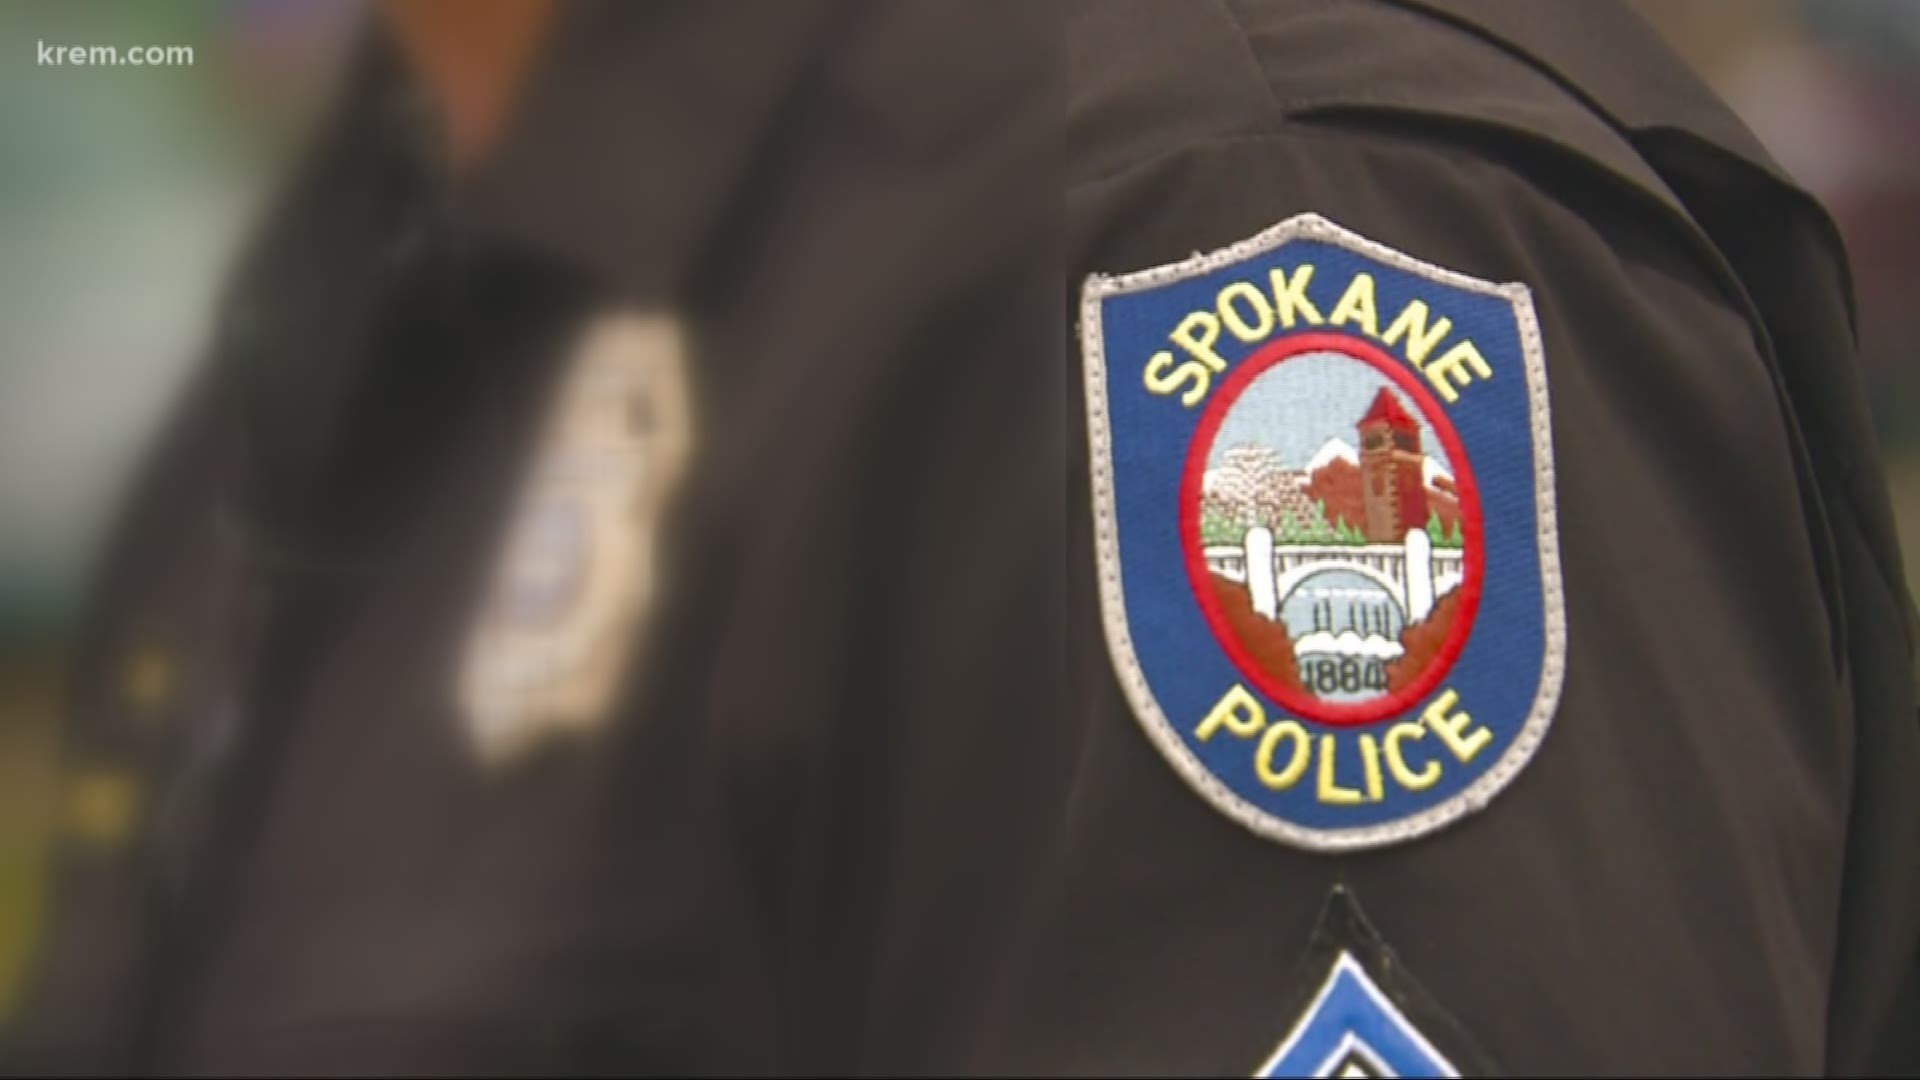 Data from 2018 shows African-Americans are up to five-times more likely to be arrested in the city of Spokane than white people.